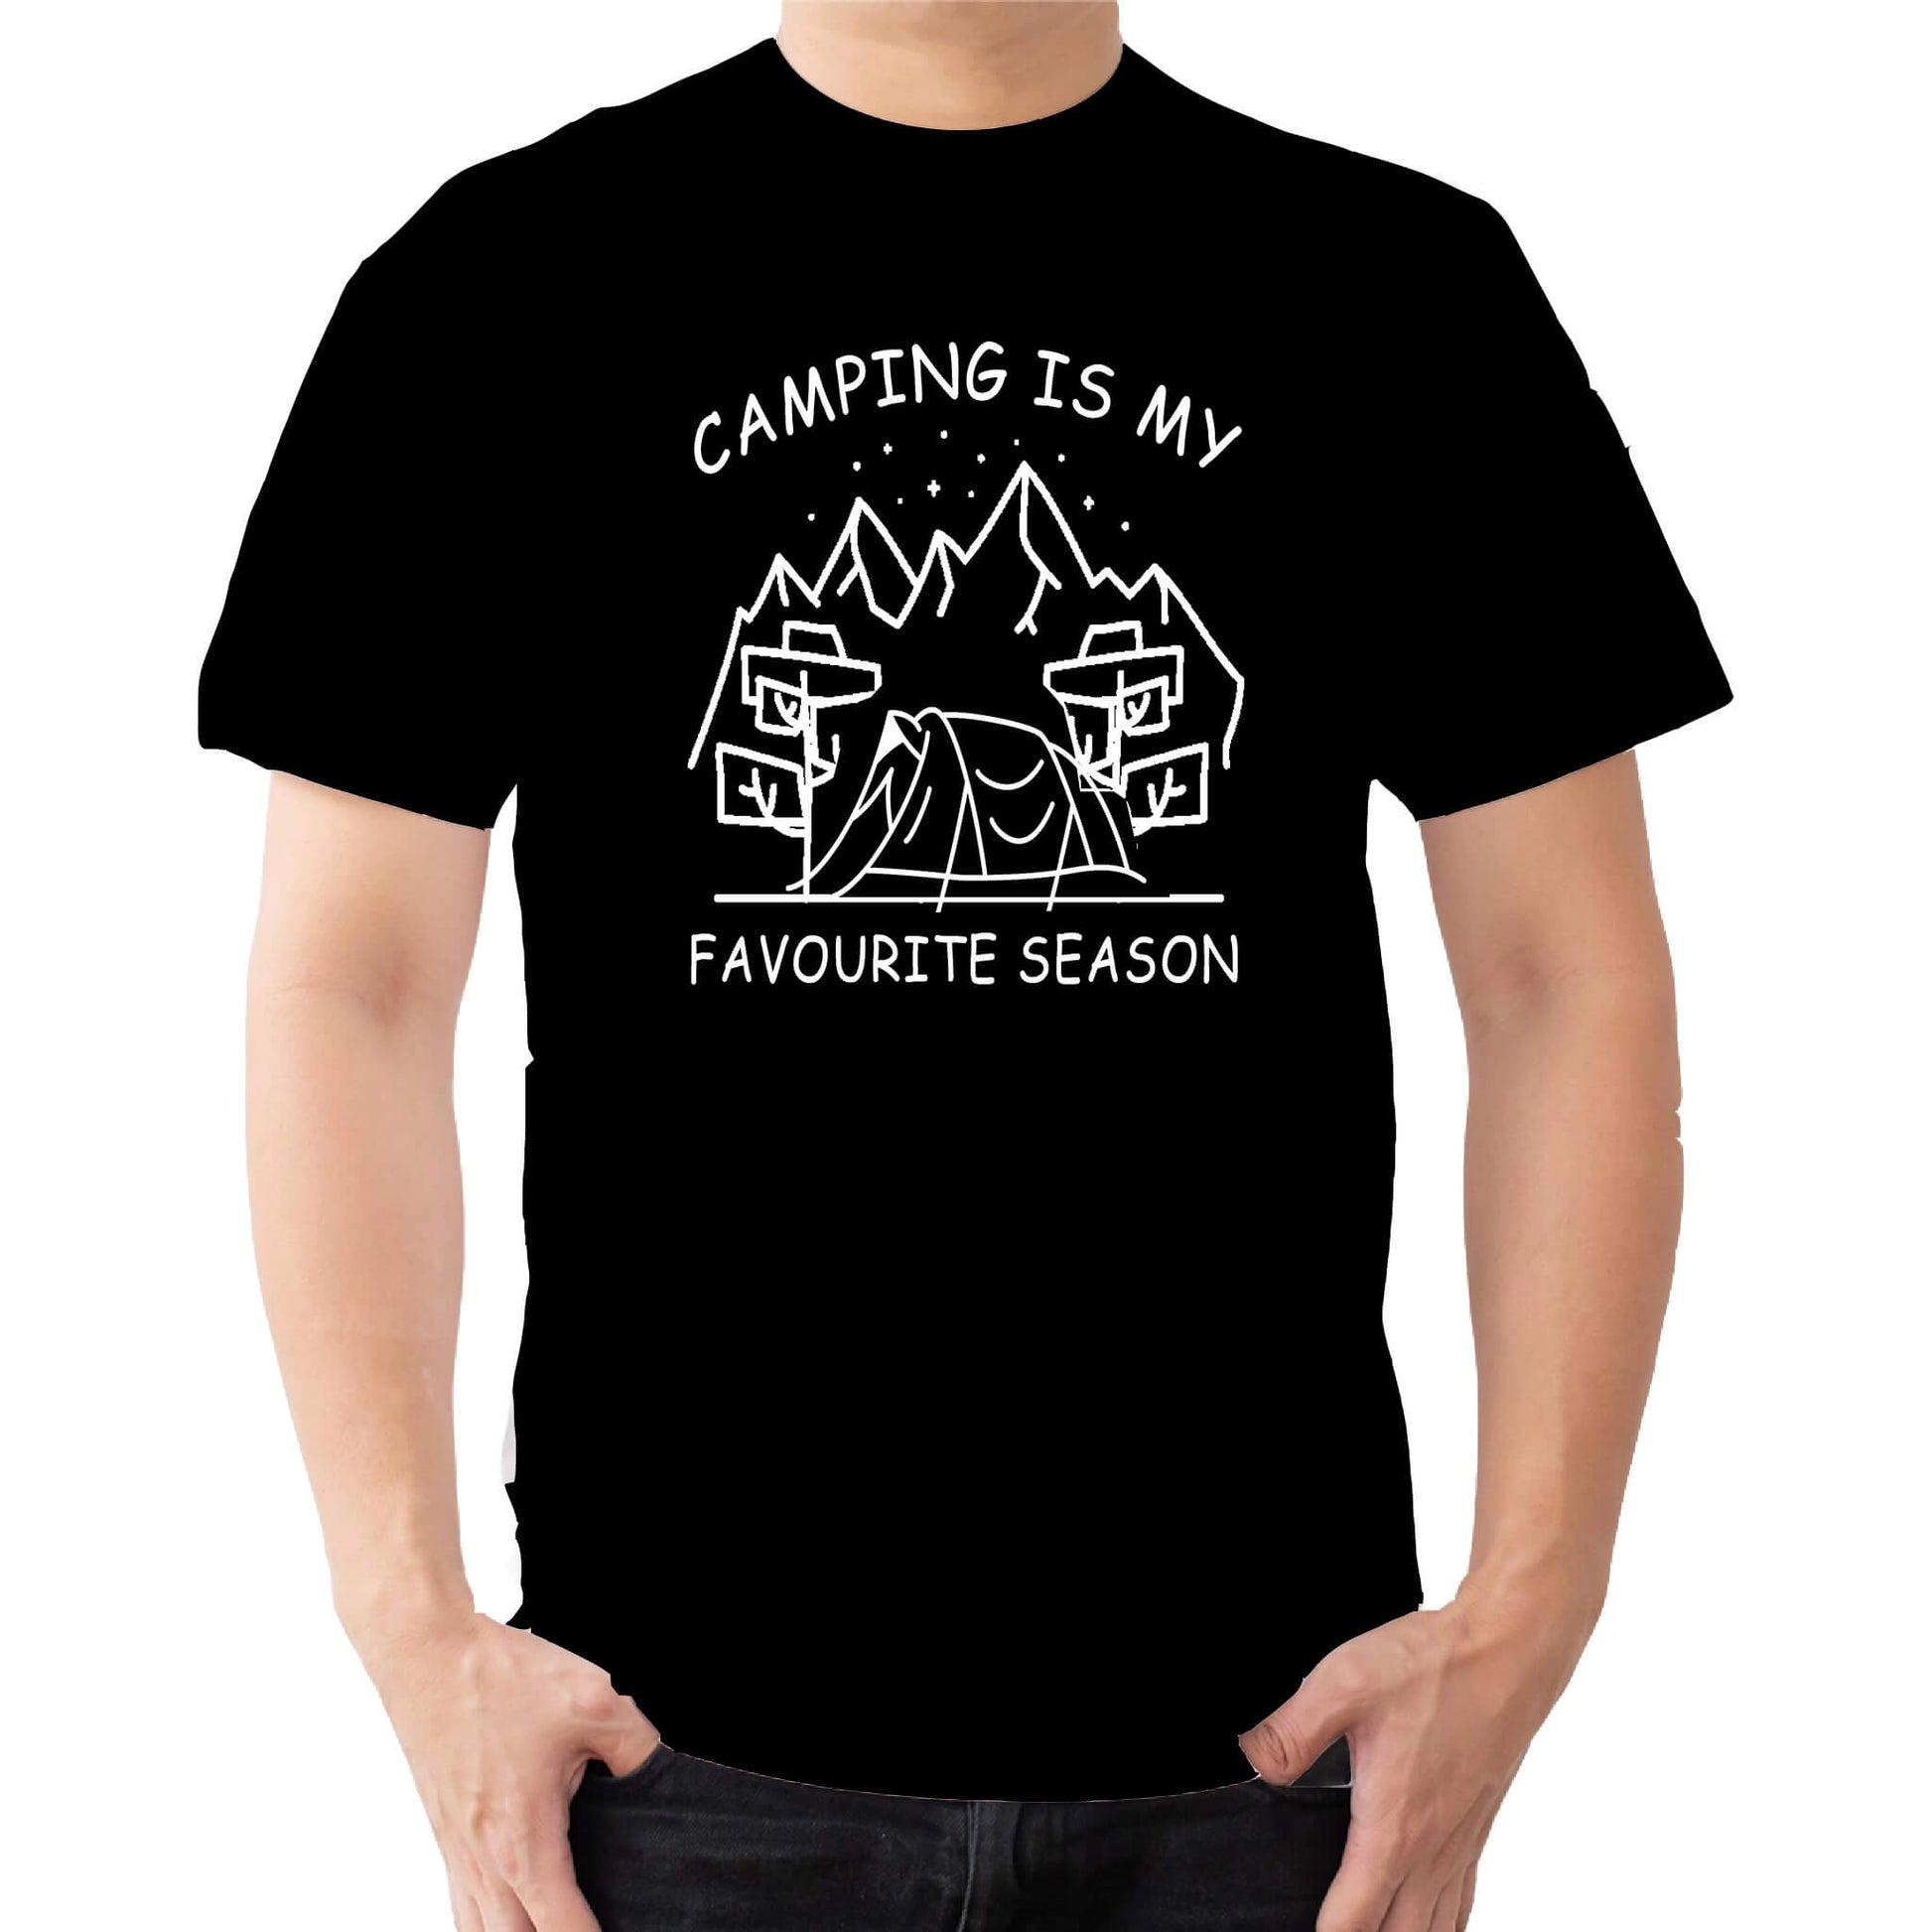  "Black Graphic tee with an illustration of a tent, surrounded by nature. Text reads: 'Camping is my favorite season.' Celebrate the great outdoors!"